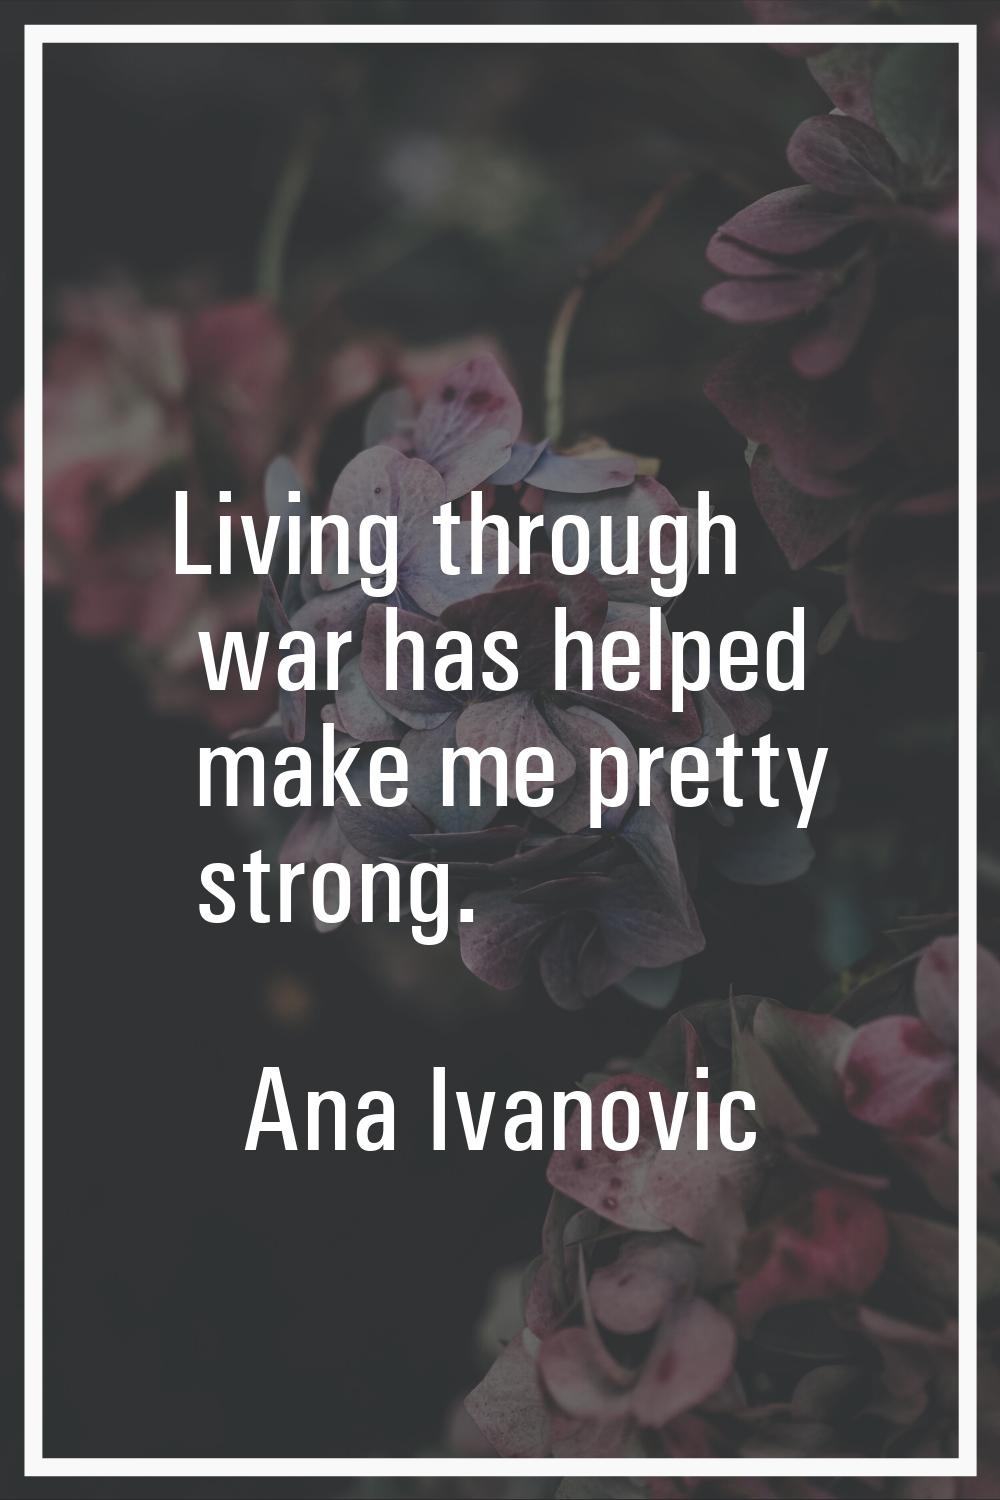 Living through war has helped make me pretty strong.